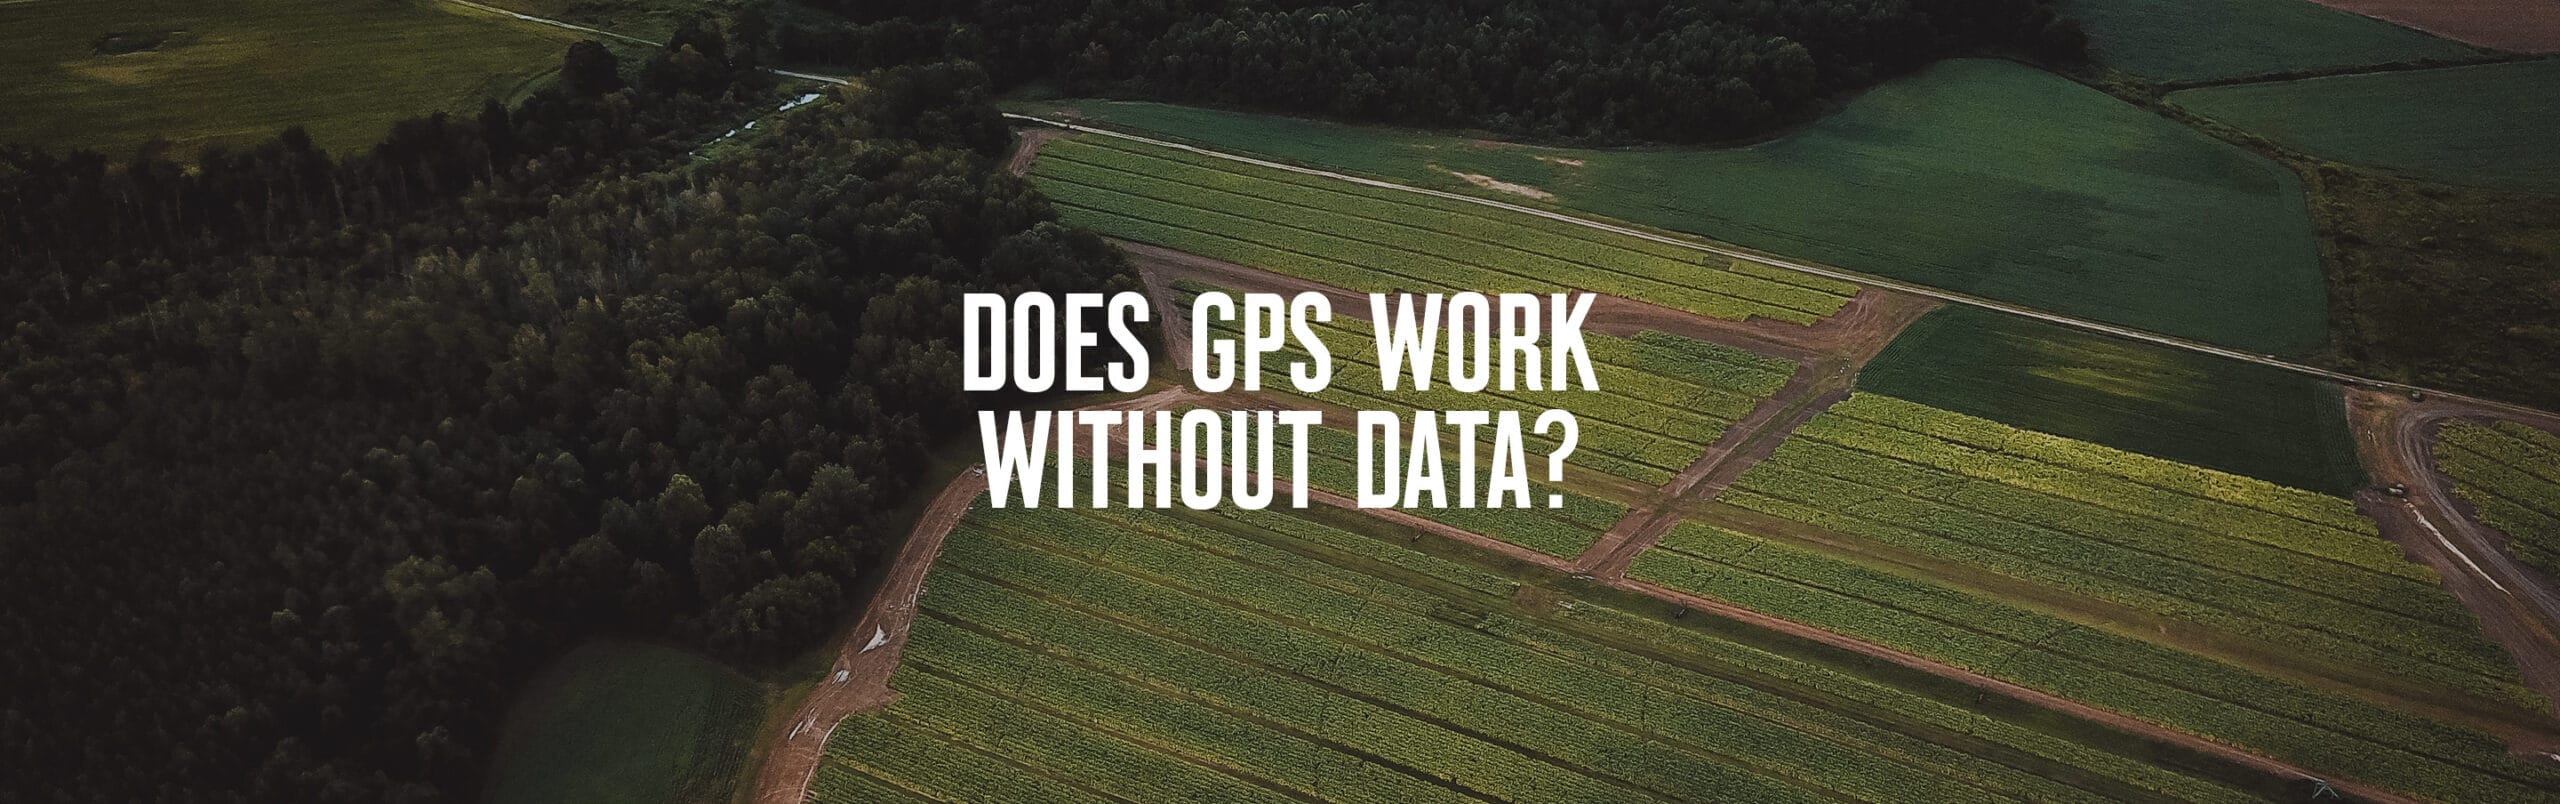 does GPS work without data?